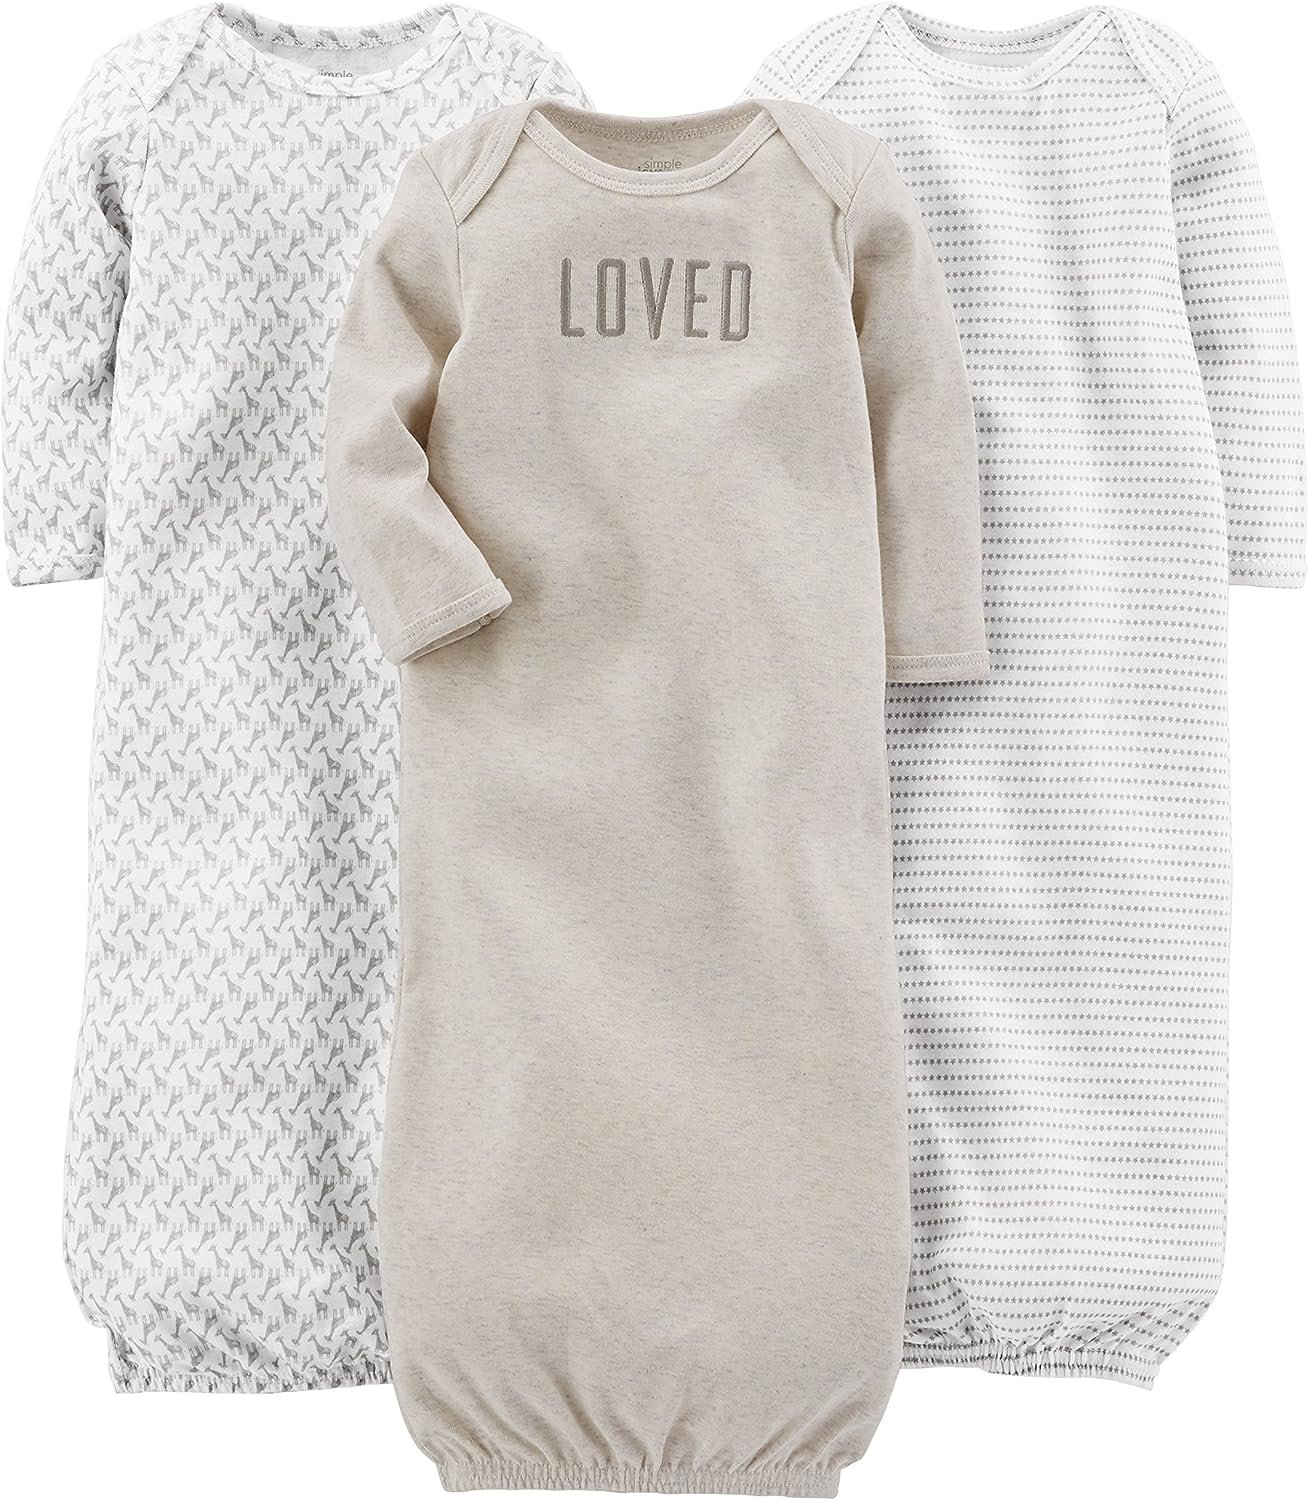 Unisex Babies Cotton Sleeper Gown, Pack of 3